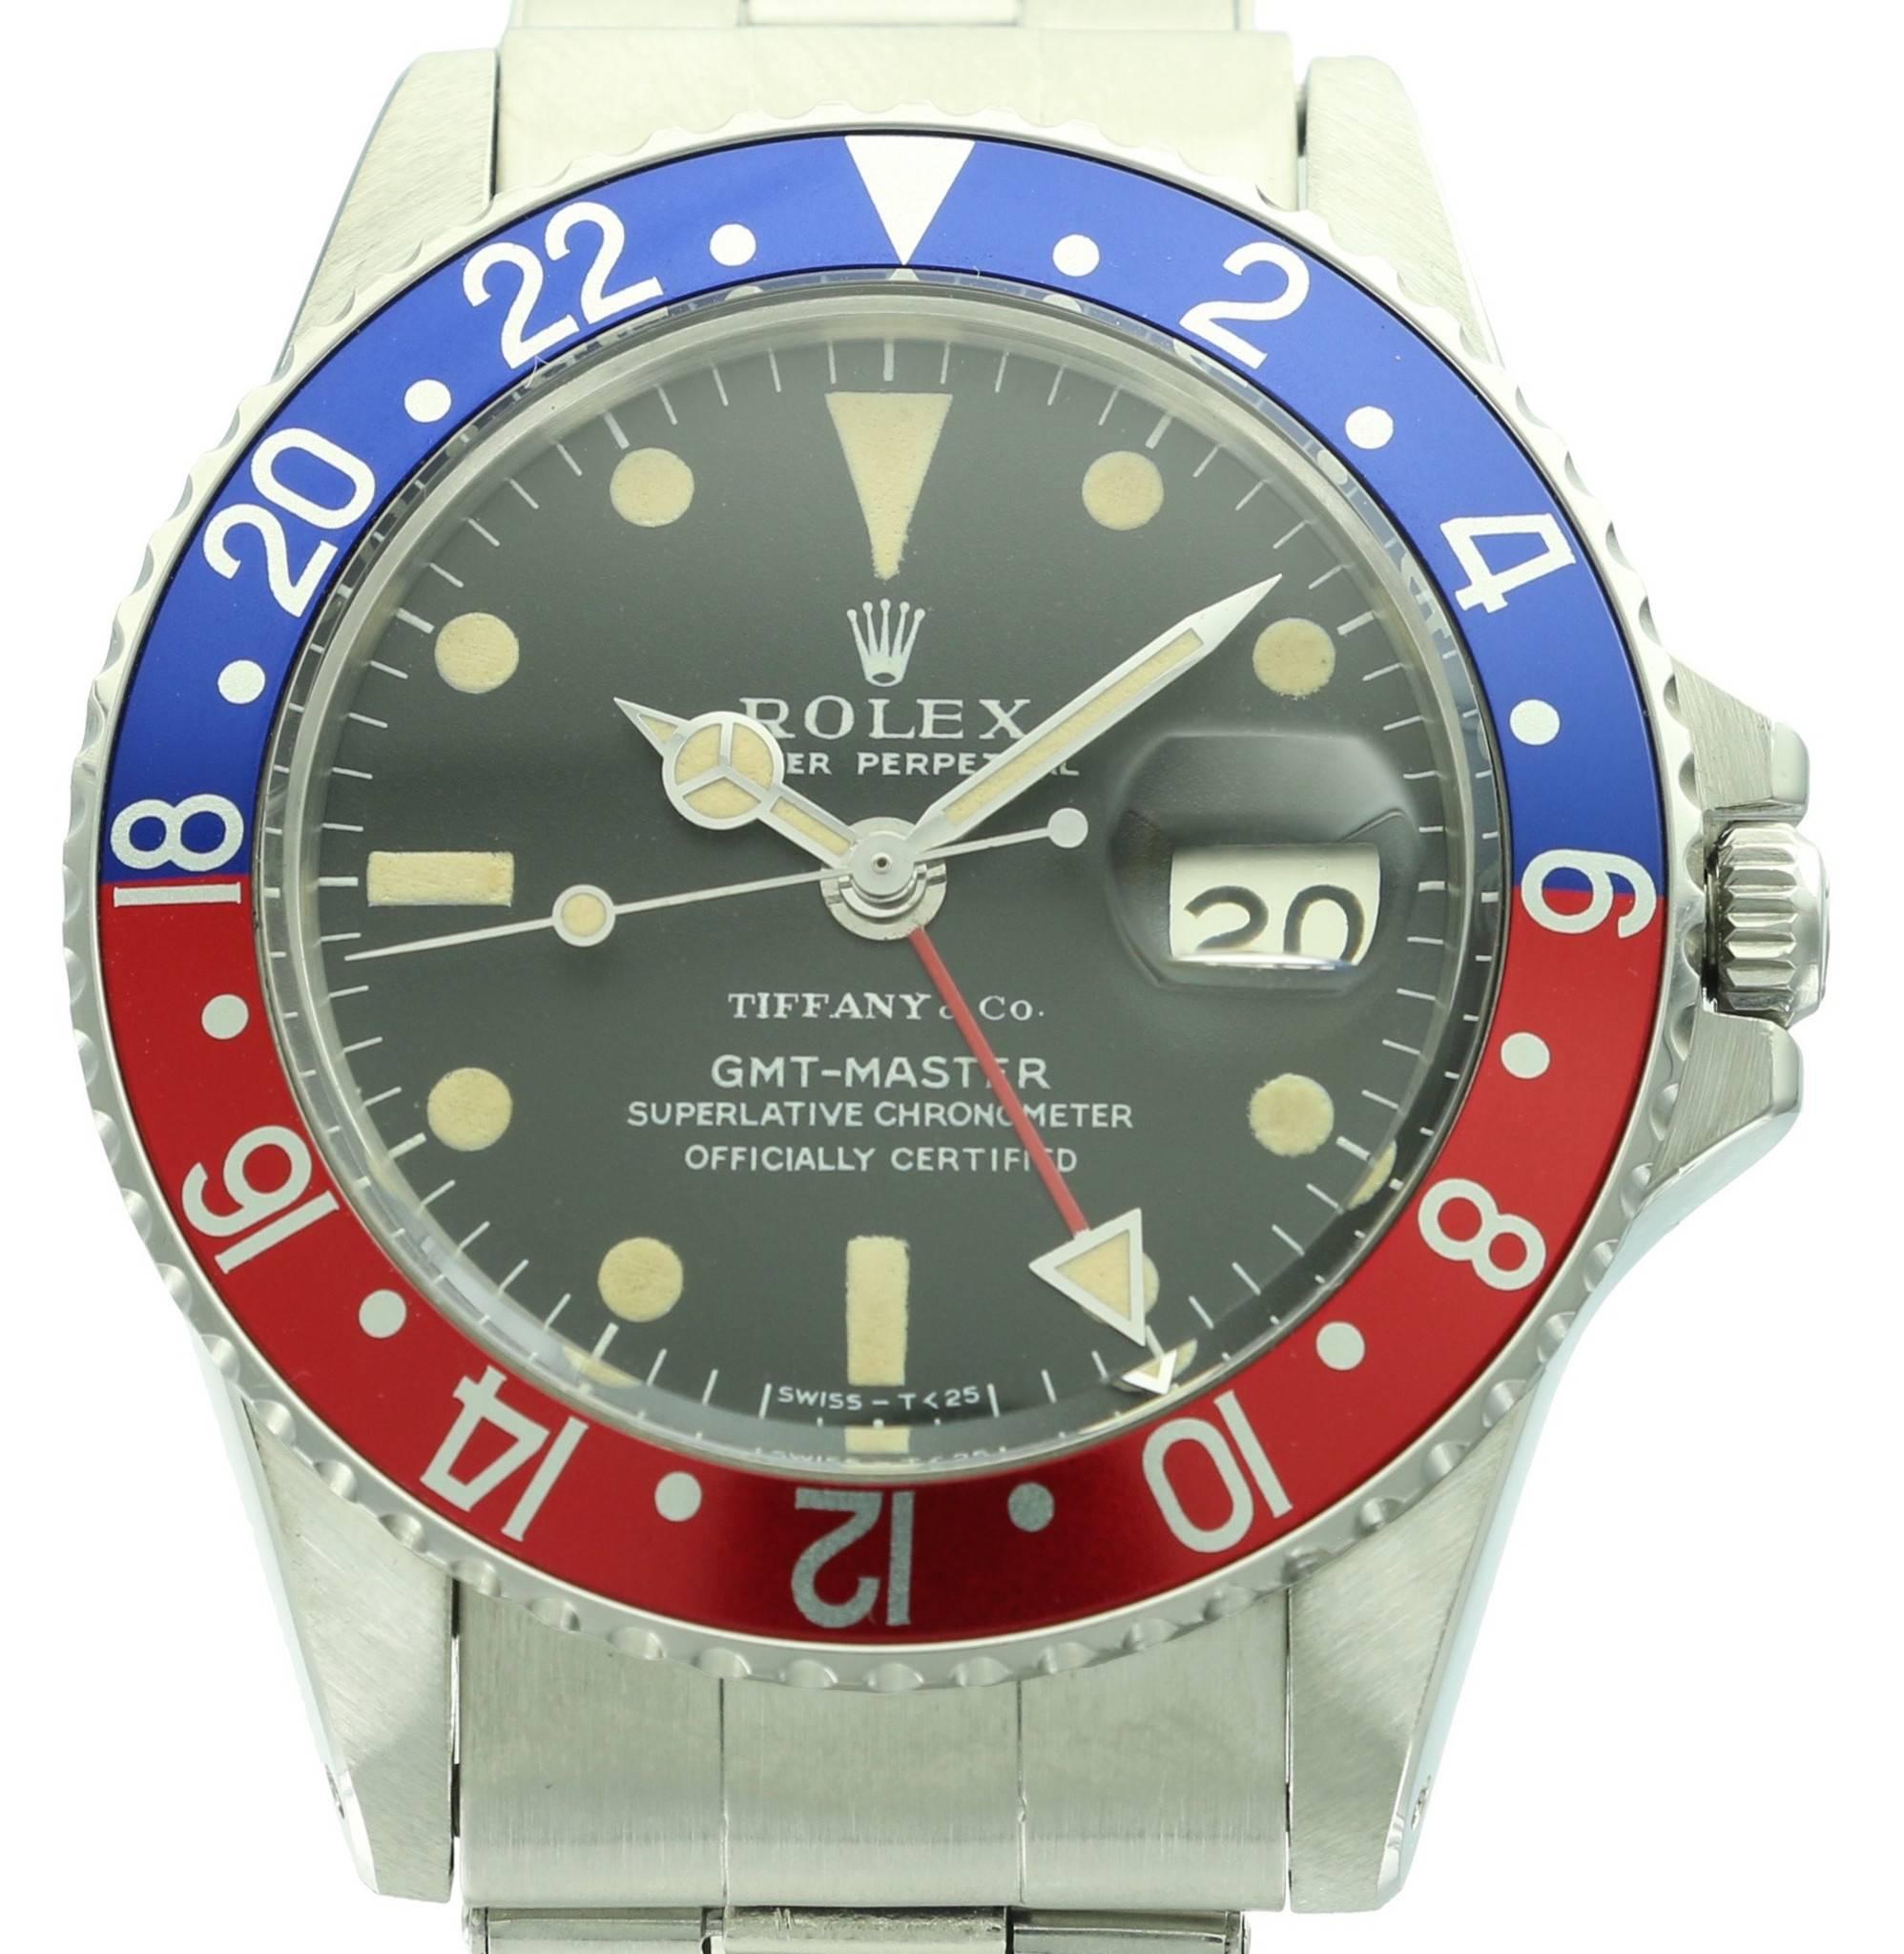 The GMT-Master is one of the pillars in the famous Rolex sport watch collection, alongside the Submariner and the Daytona. Easily identifiable with its two-colored bezel, the GMT-Master has become an icon among vintage watch collectors, with some